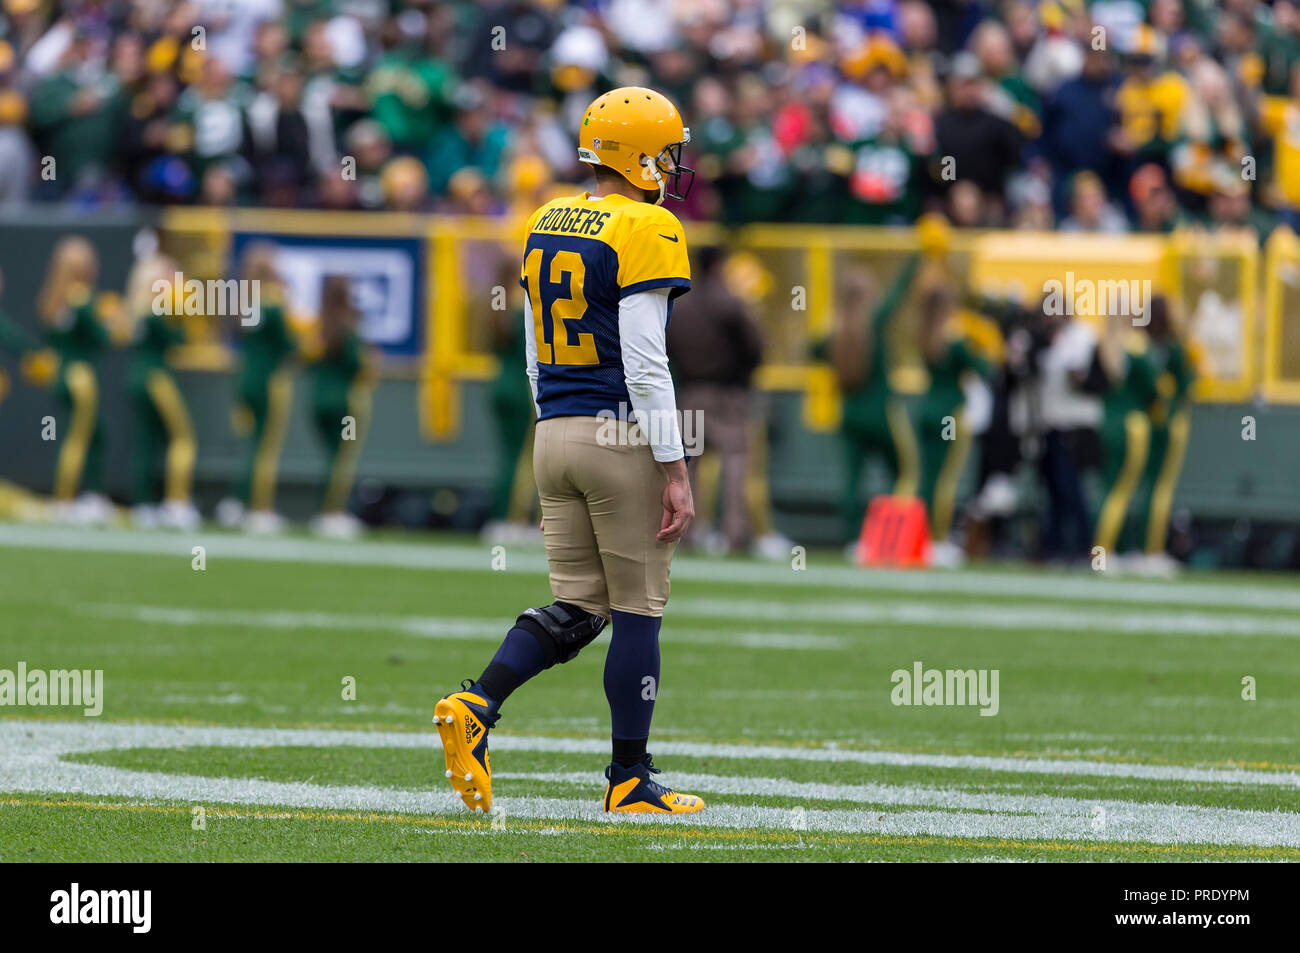 kode skak Smag Green Bay, WI, USA. 30th Sep, 2018. Green Bay Packers quarterback Aaron  Rodgers #12 during the NFL Football game between the Buffalo Bills and the Green  Bay Packers at Lambeau Field in